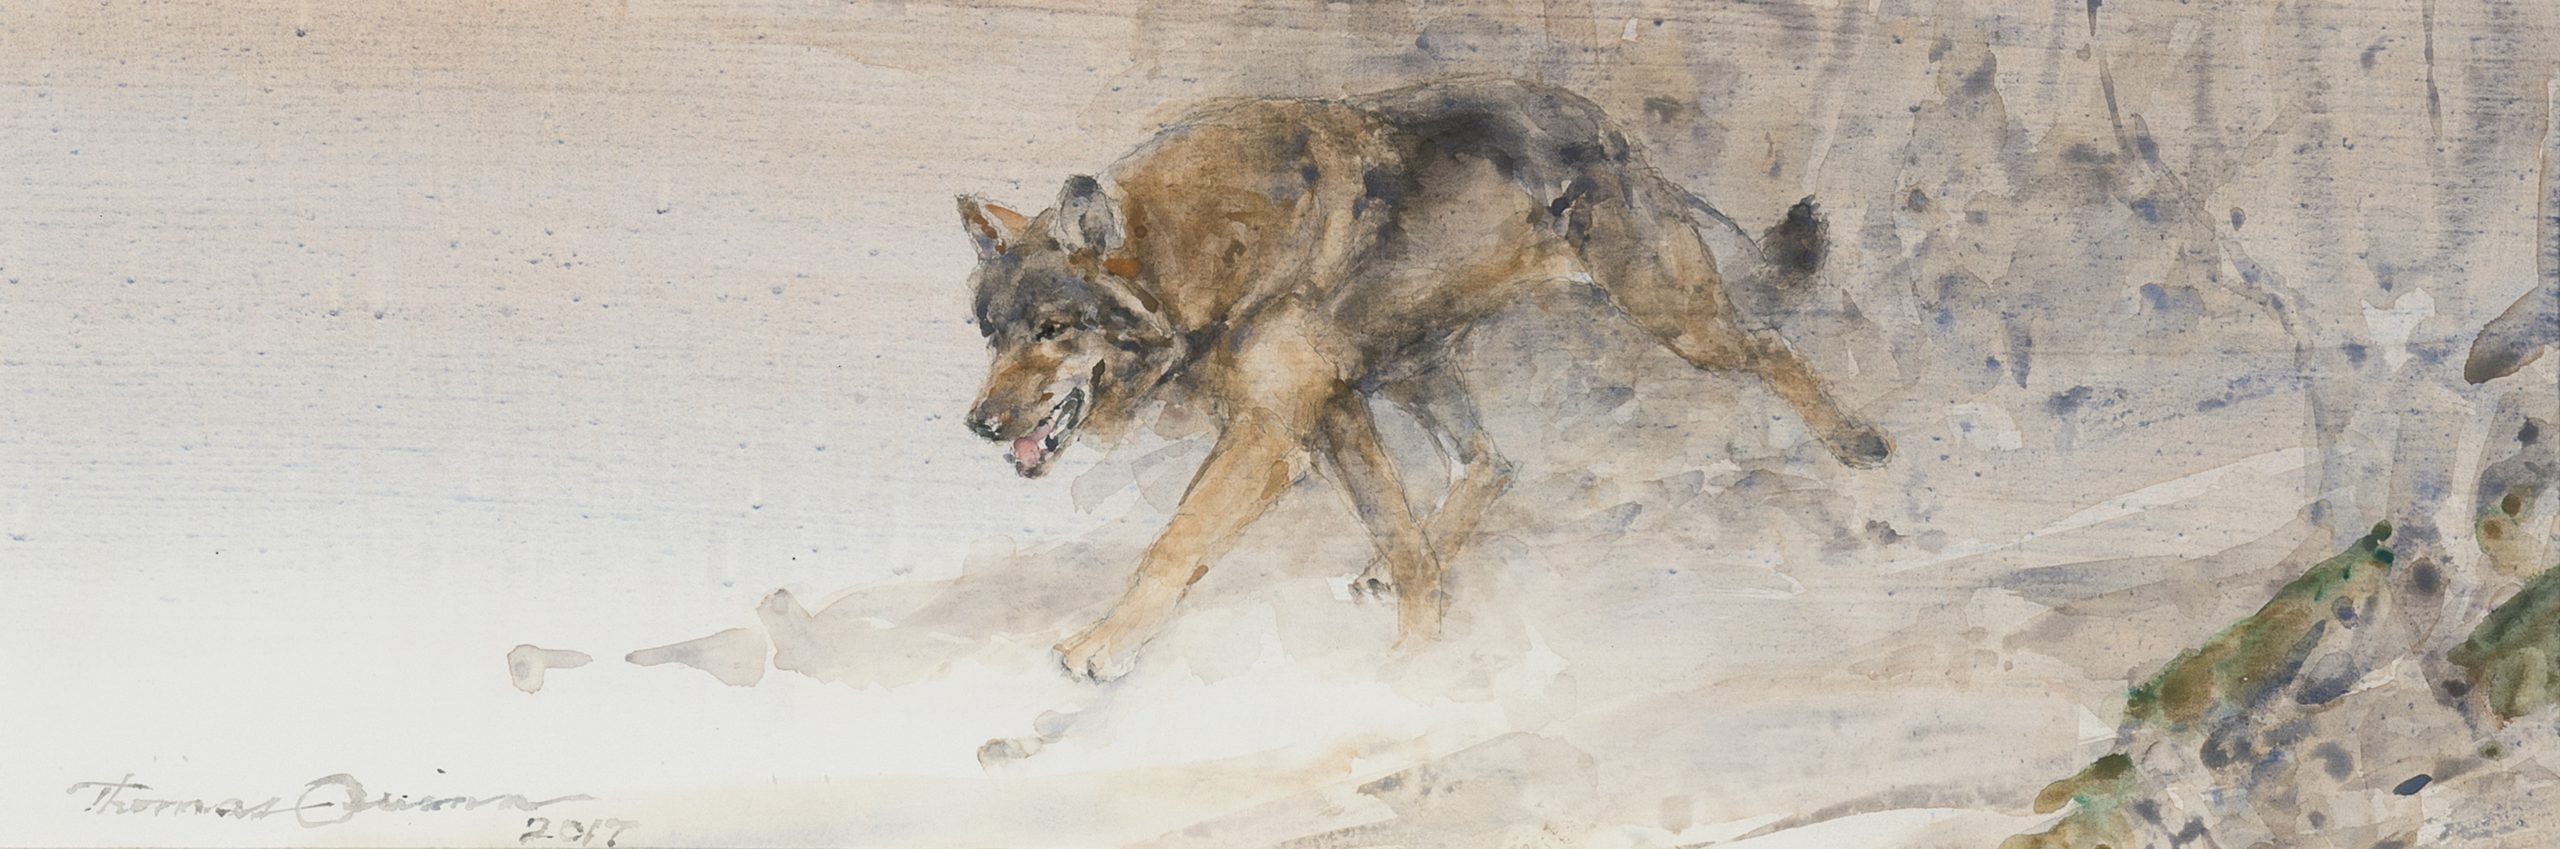 

											On View Santa Fe</b>

											<em>
												Selections by Thomas Quinn</em> 

											<h4>
												February 3 - April 29, 2023											</h4>

		                																																													<i>Wolf Trot,</i>  
																																																					watercolor on paper, 
																																								5 7/8 x 17 3/4 inches 
																								
		                				